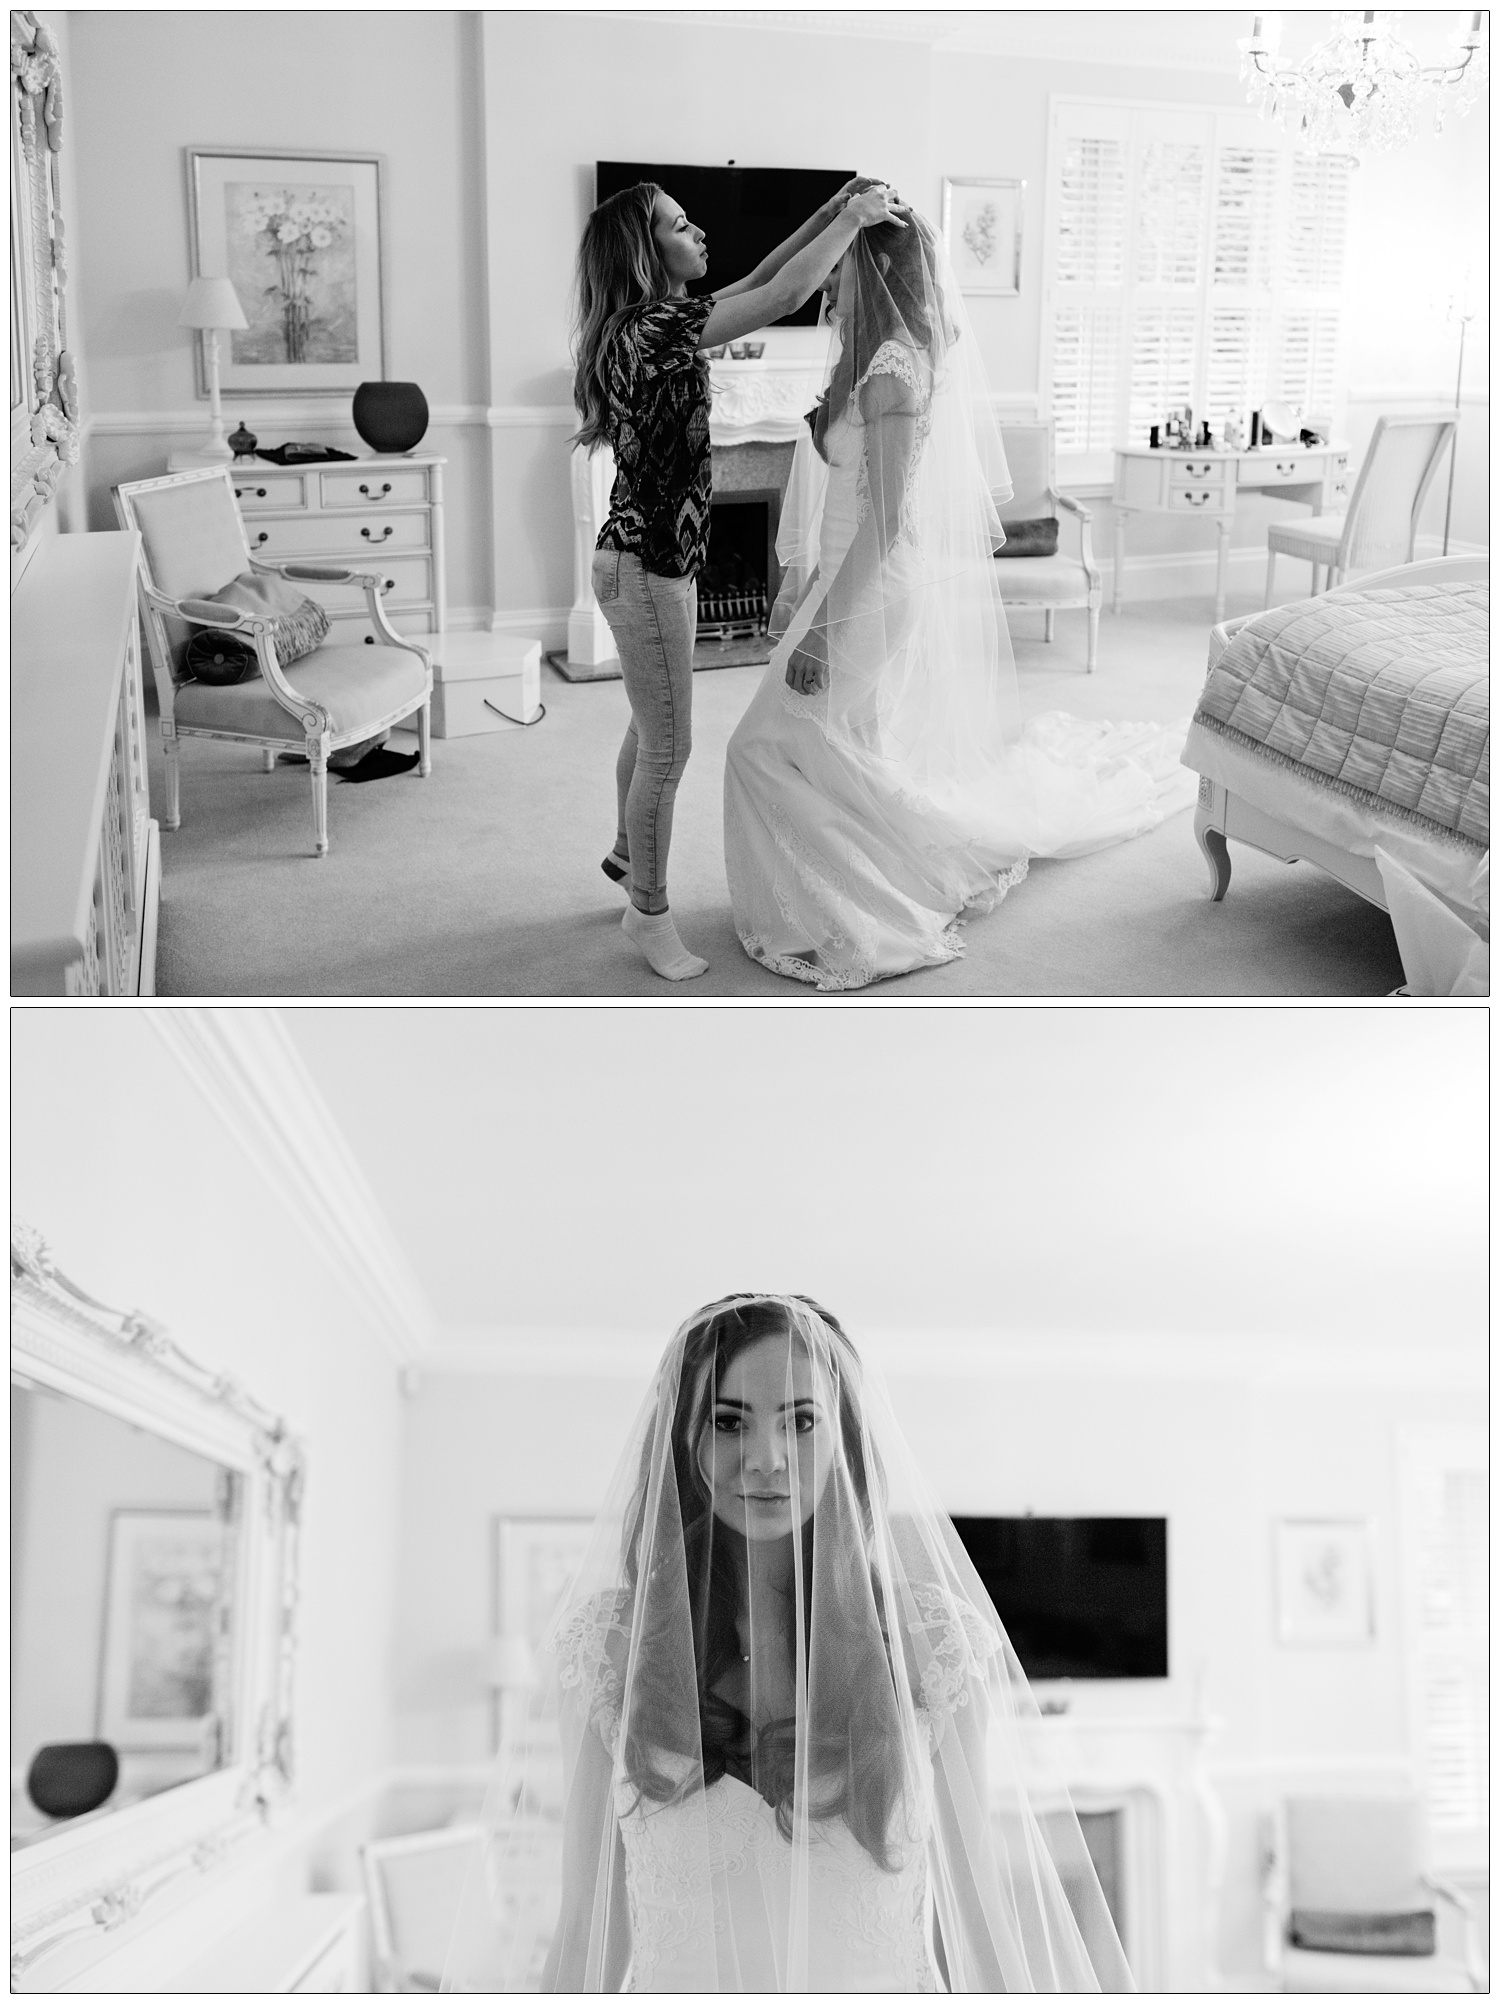 A hairdresser puts the veil on a bride in a bedroom. The bride, wearing Galia Lahav from Browns in London, looks at the camera through her veil.